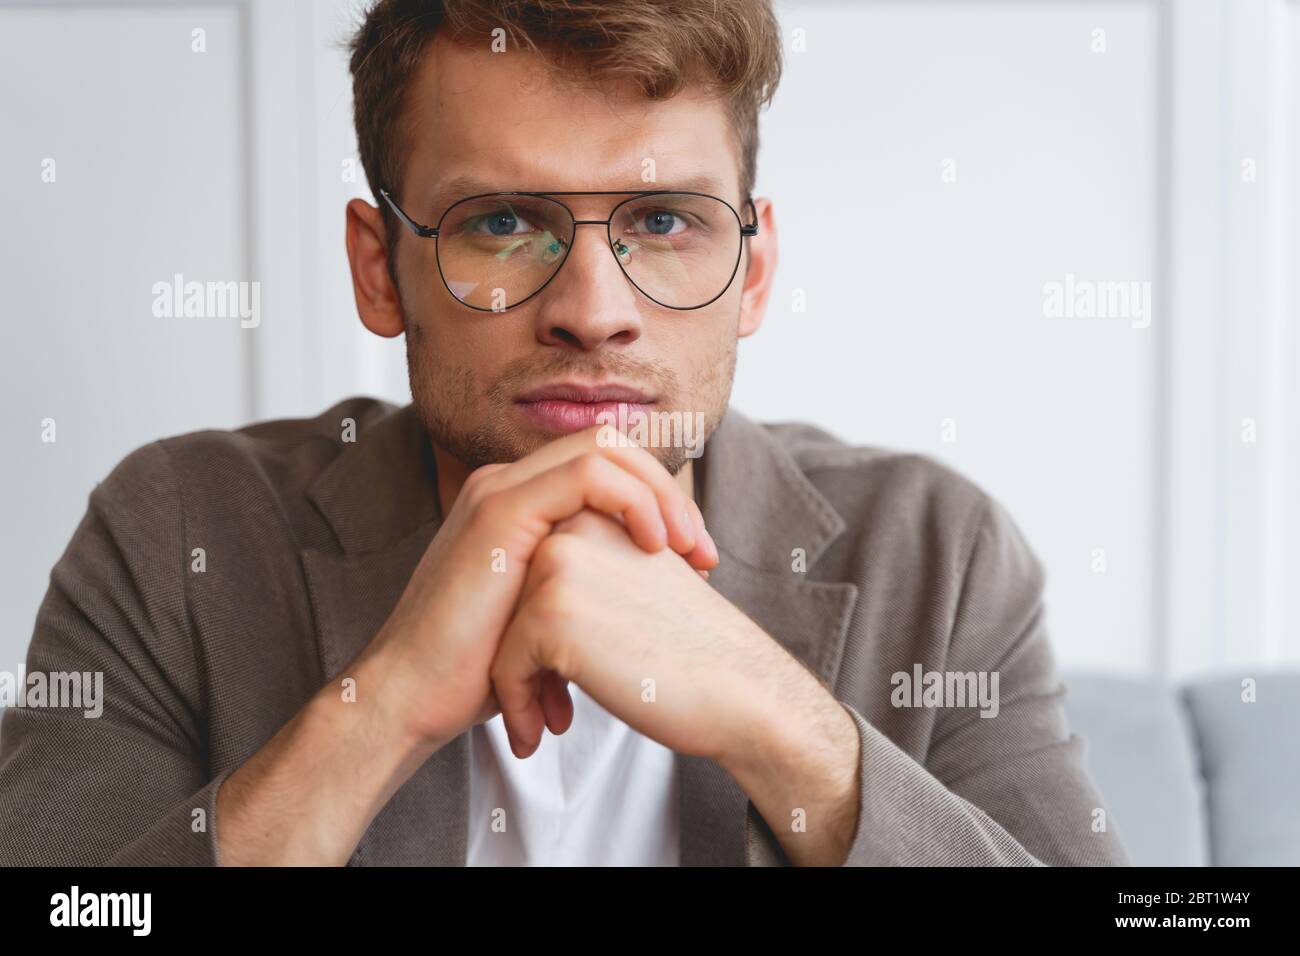 Handsome young man resting chin on his hands Stock Photo - Alamy